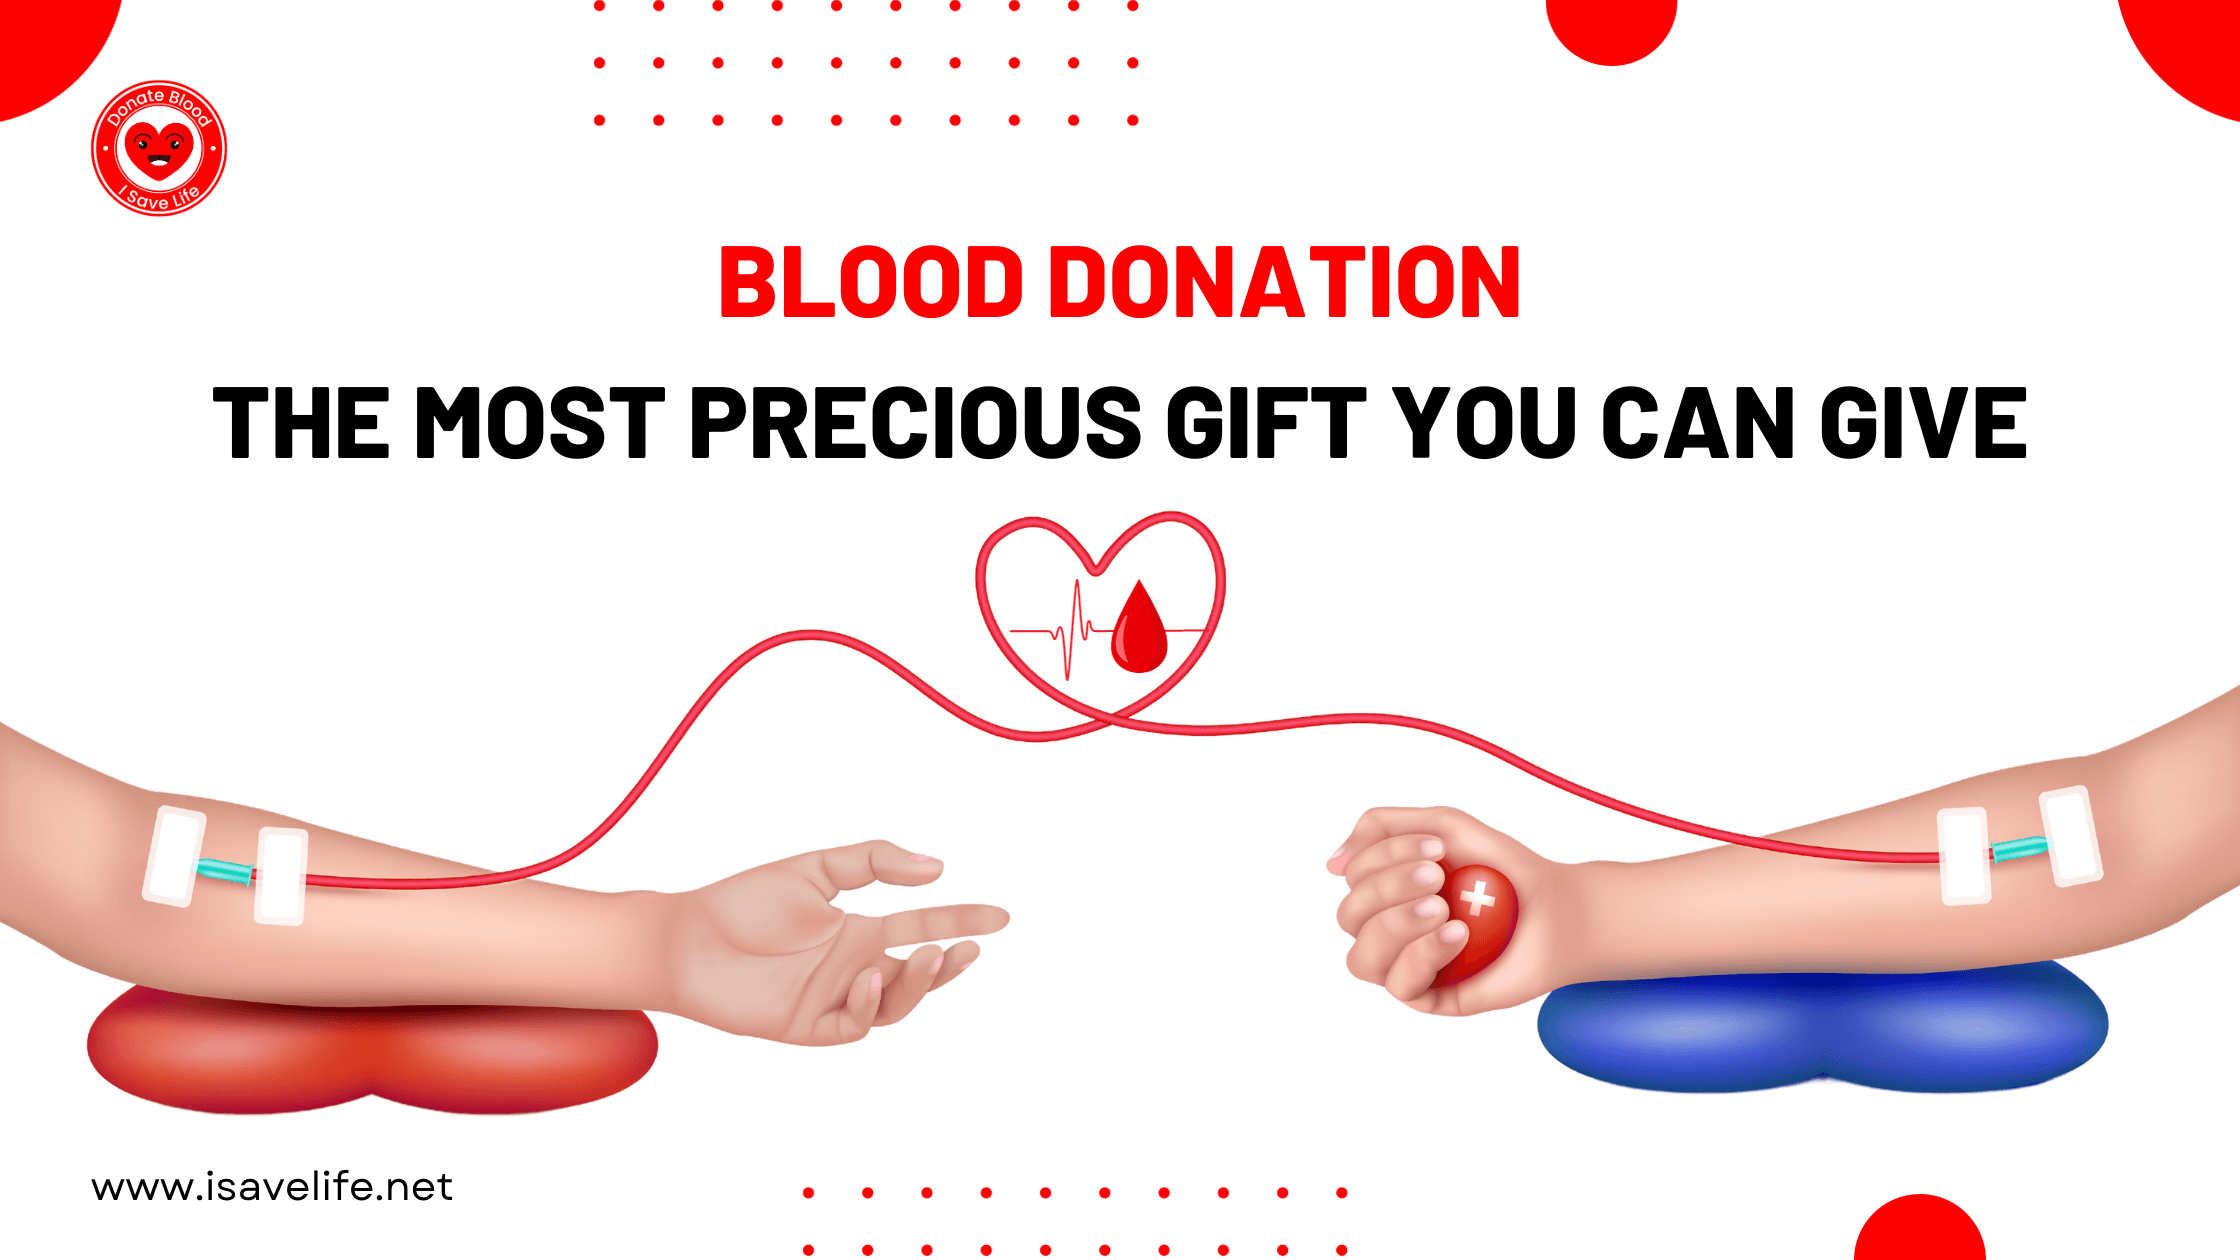 Donate Blood and Save Lives on World Blood Donor Day